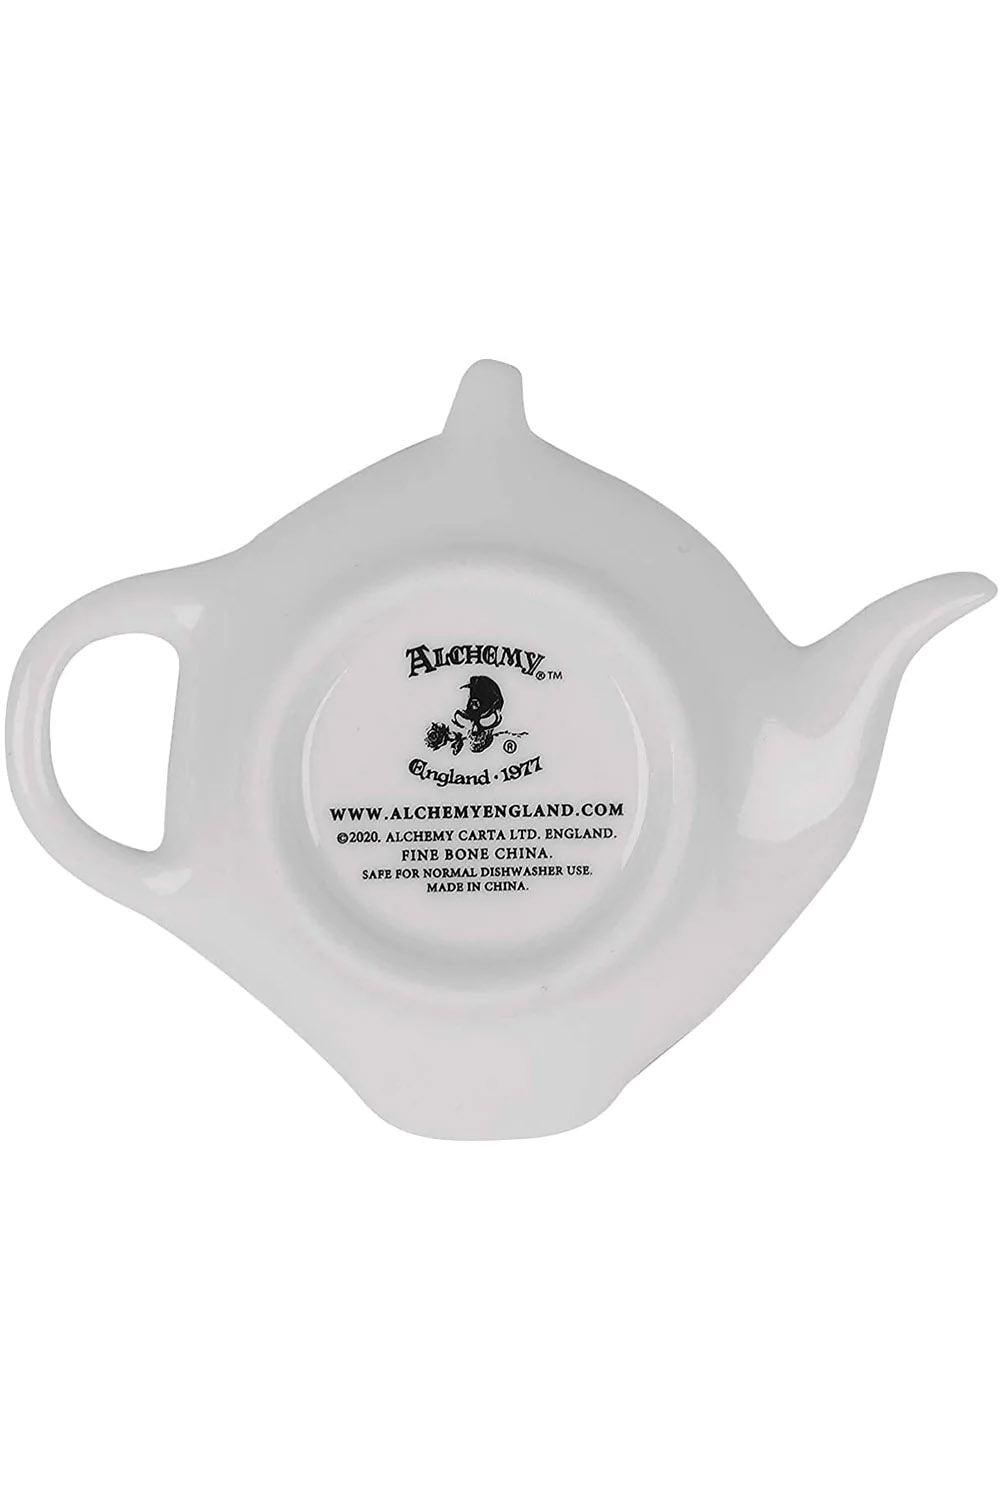 Alchemy Crescent Witches Brew Tea Bag & Spoon Rest - VampireFreaks